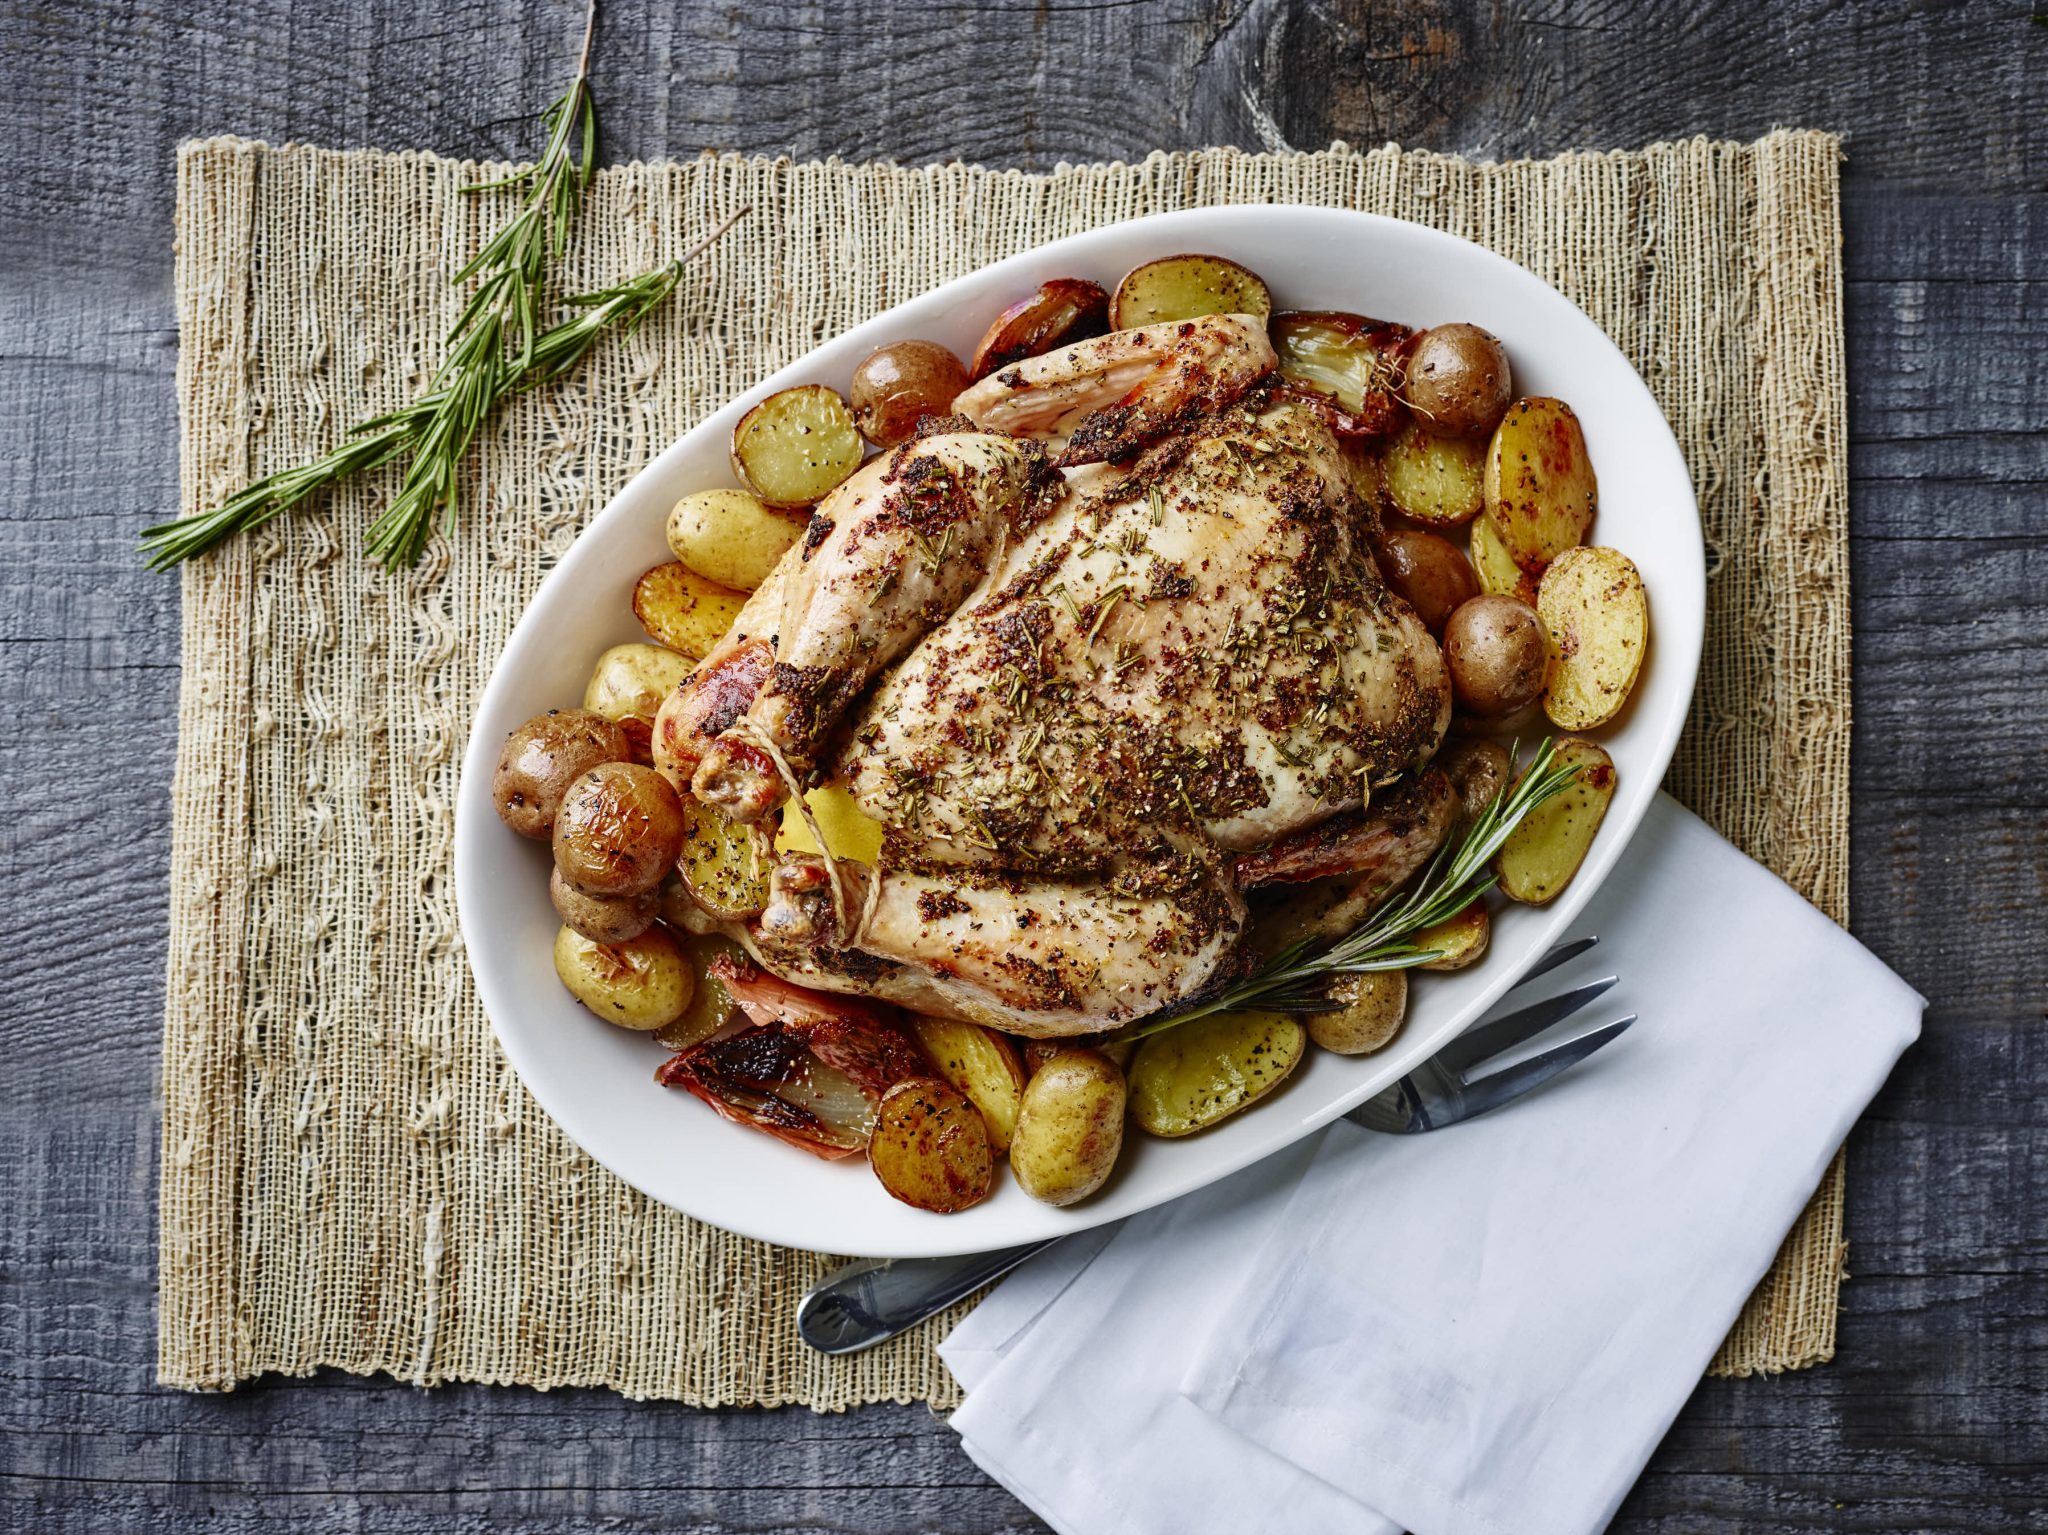 Roasted chicken and potatoes